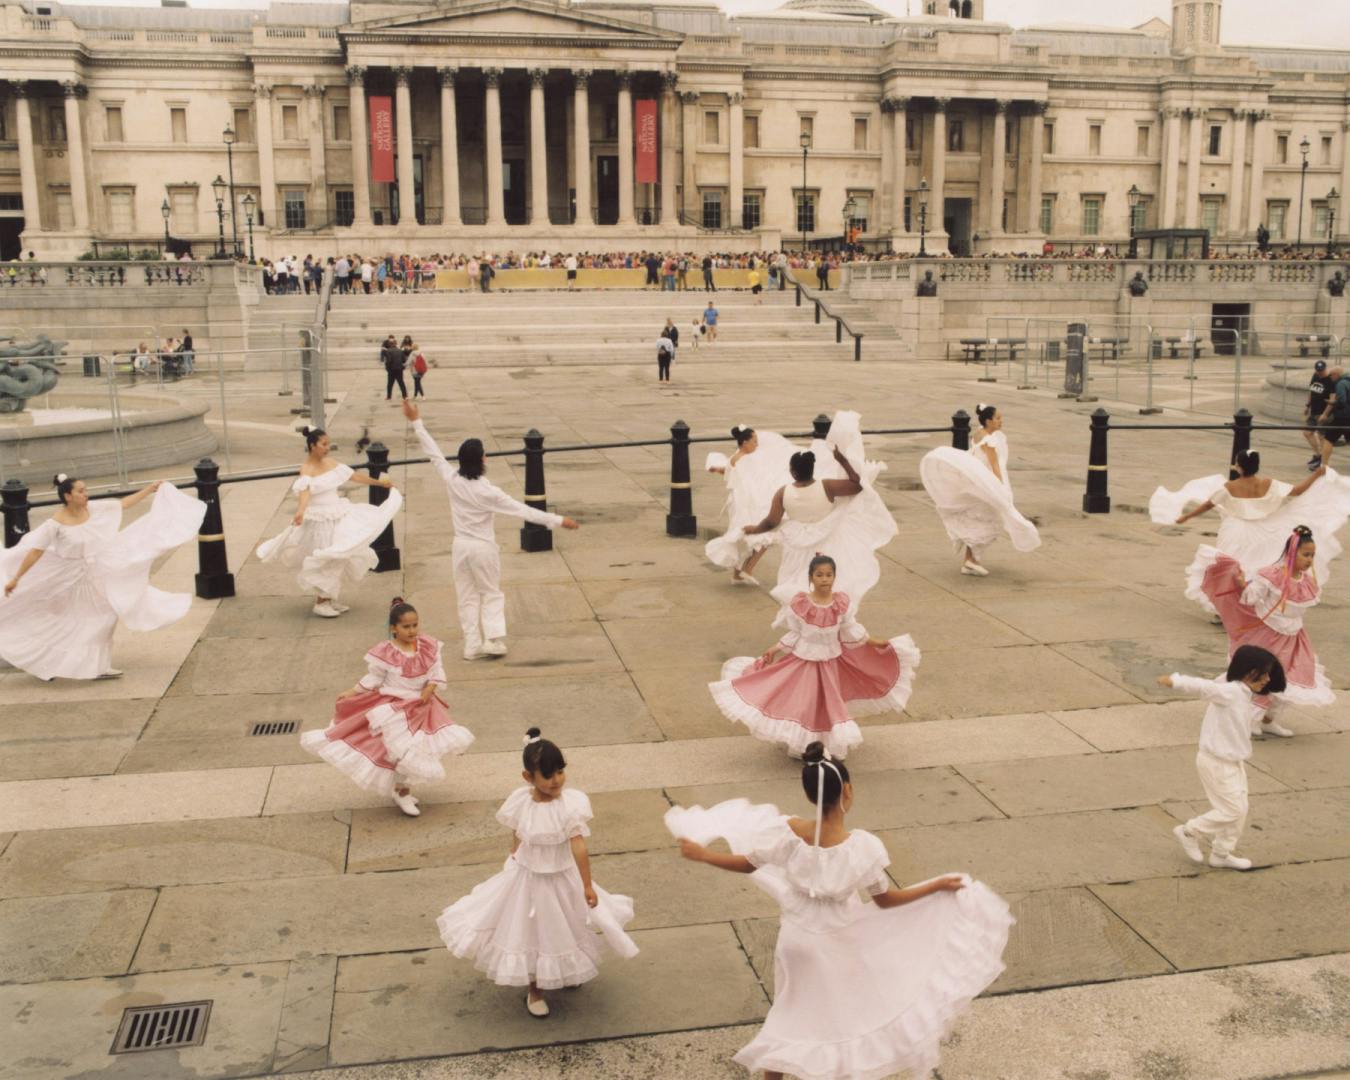 Image by Silvana Trevale of a group of children in dresses dancing in unison on Trafalgar Square